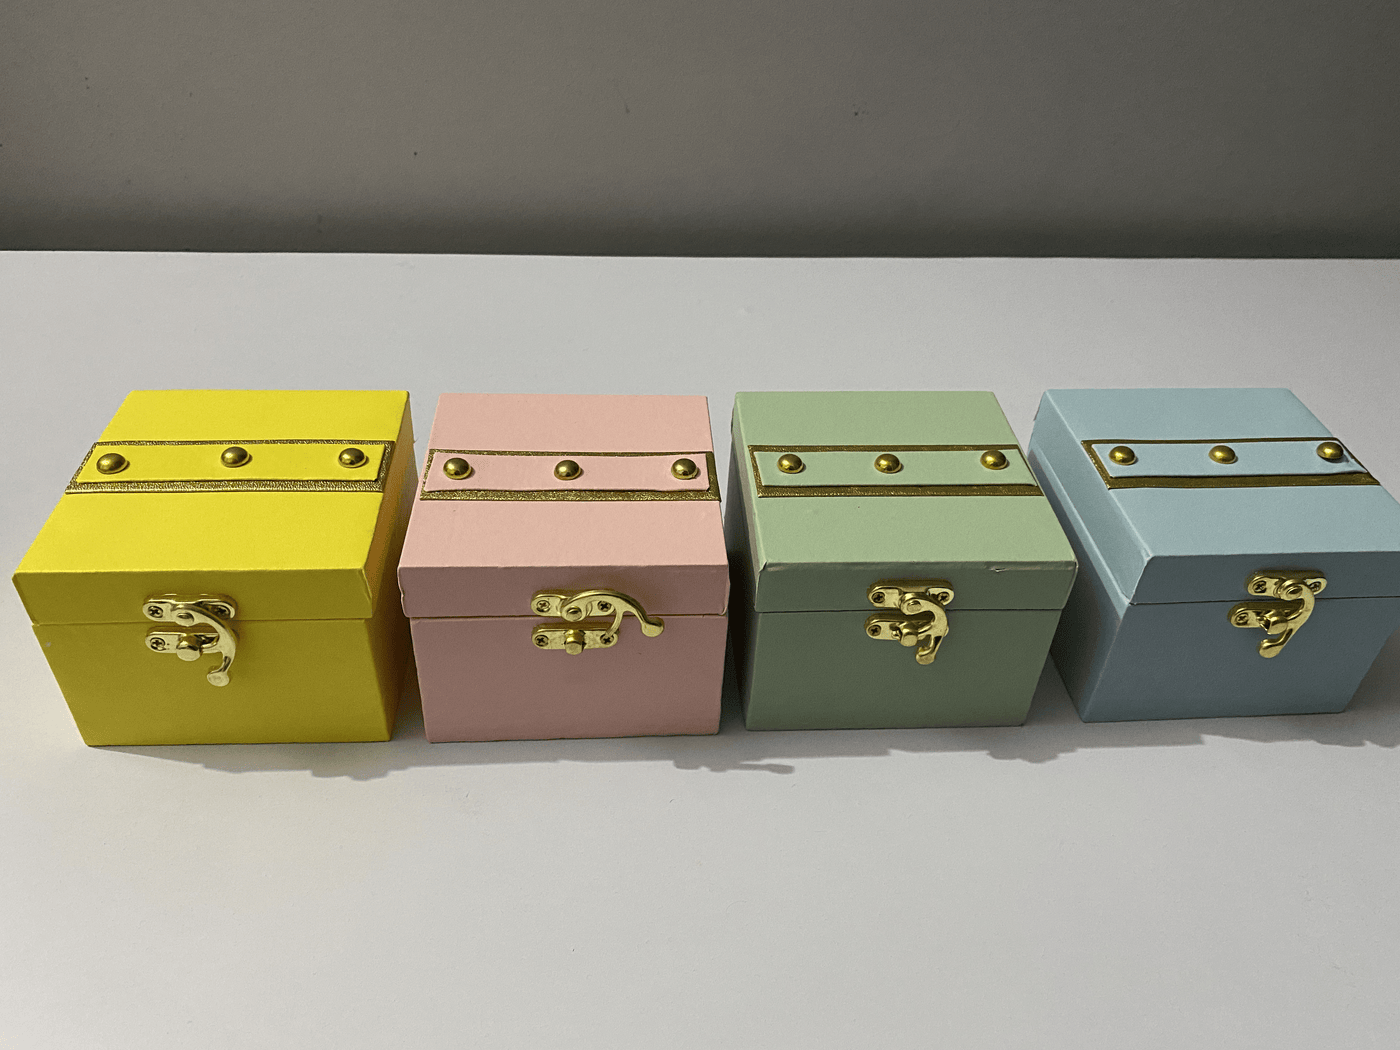 Lamansh leatherite boxes LAMANSH® (4*4 inch) Leather mini trunk boxes for gifting 🎁 / small leatherite lock boxes for wedding favors / Jewellery✨orgainzer box